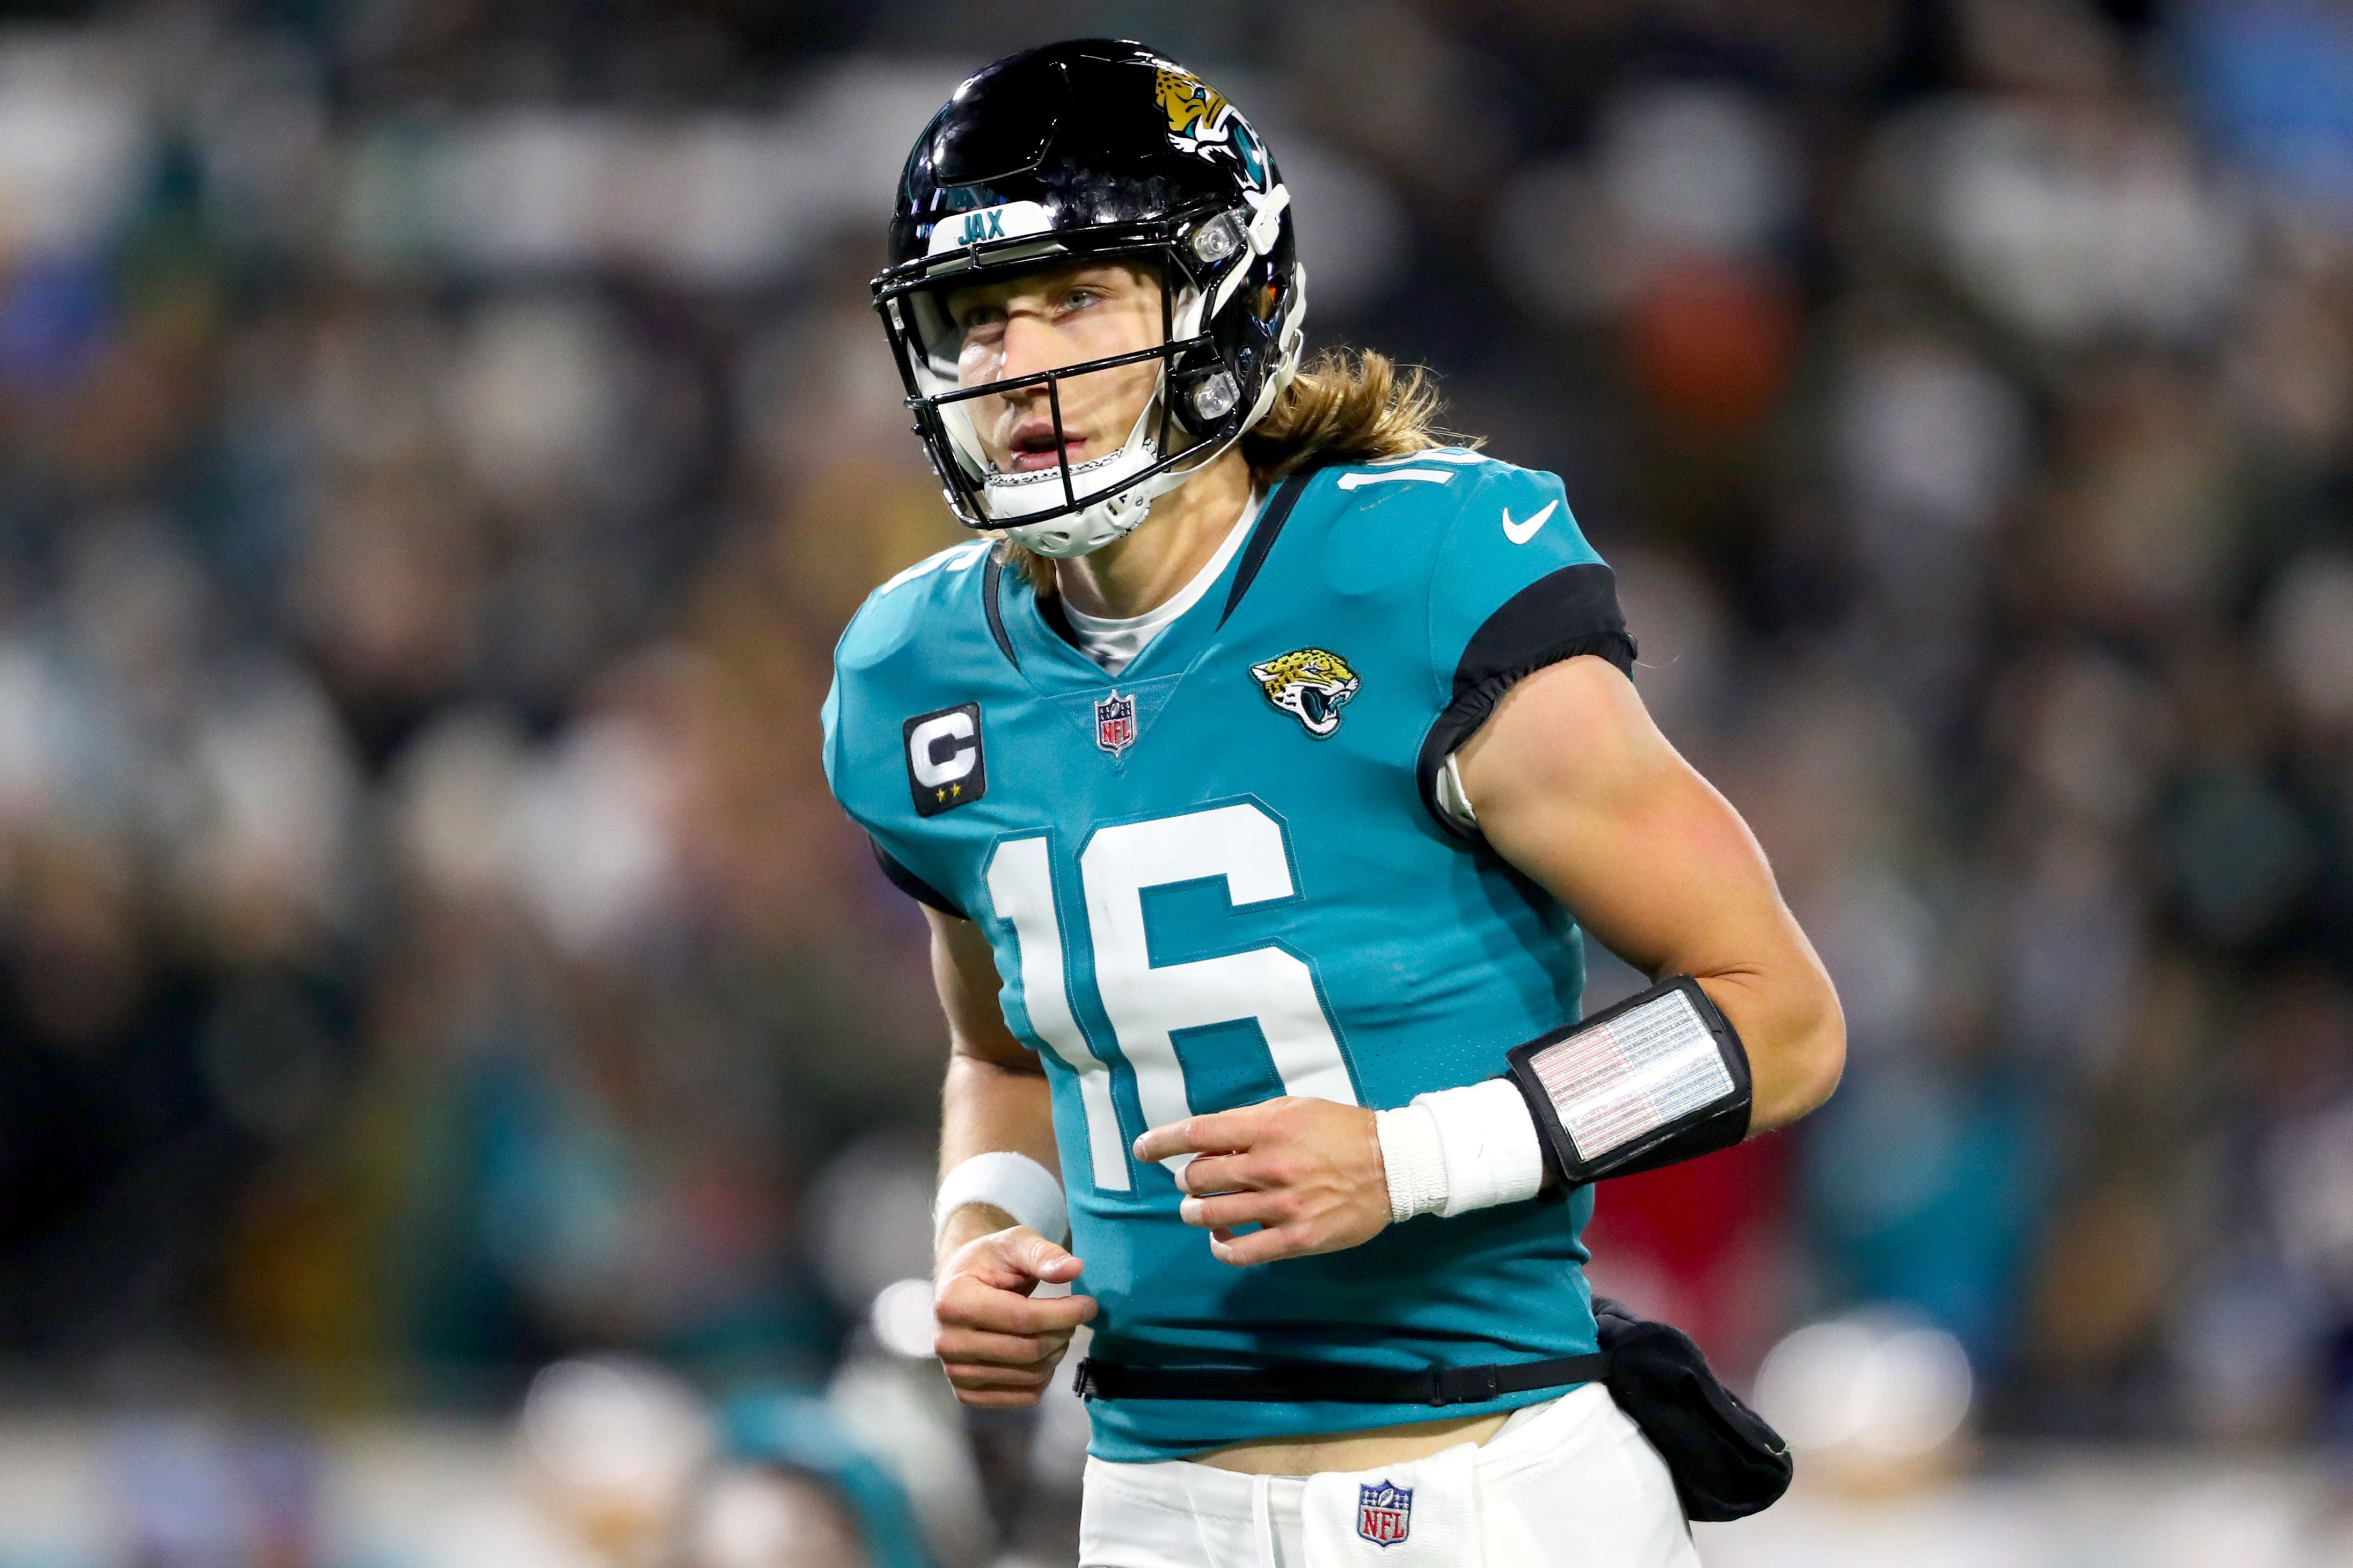 A Letter to Jacksonville by Trevor Lawrence